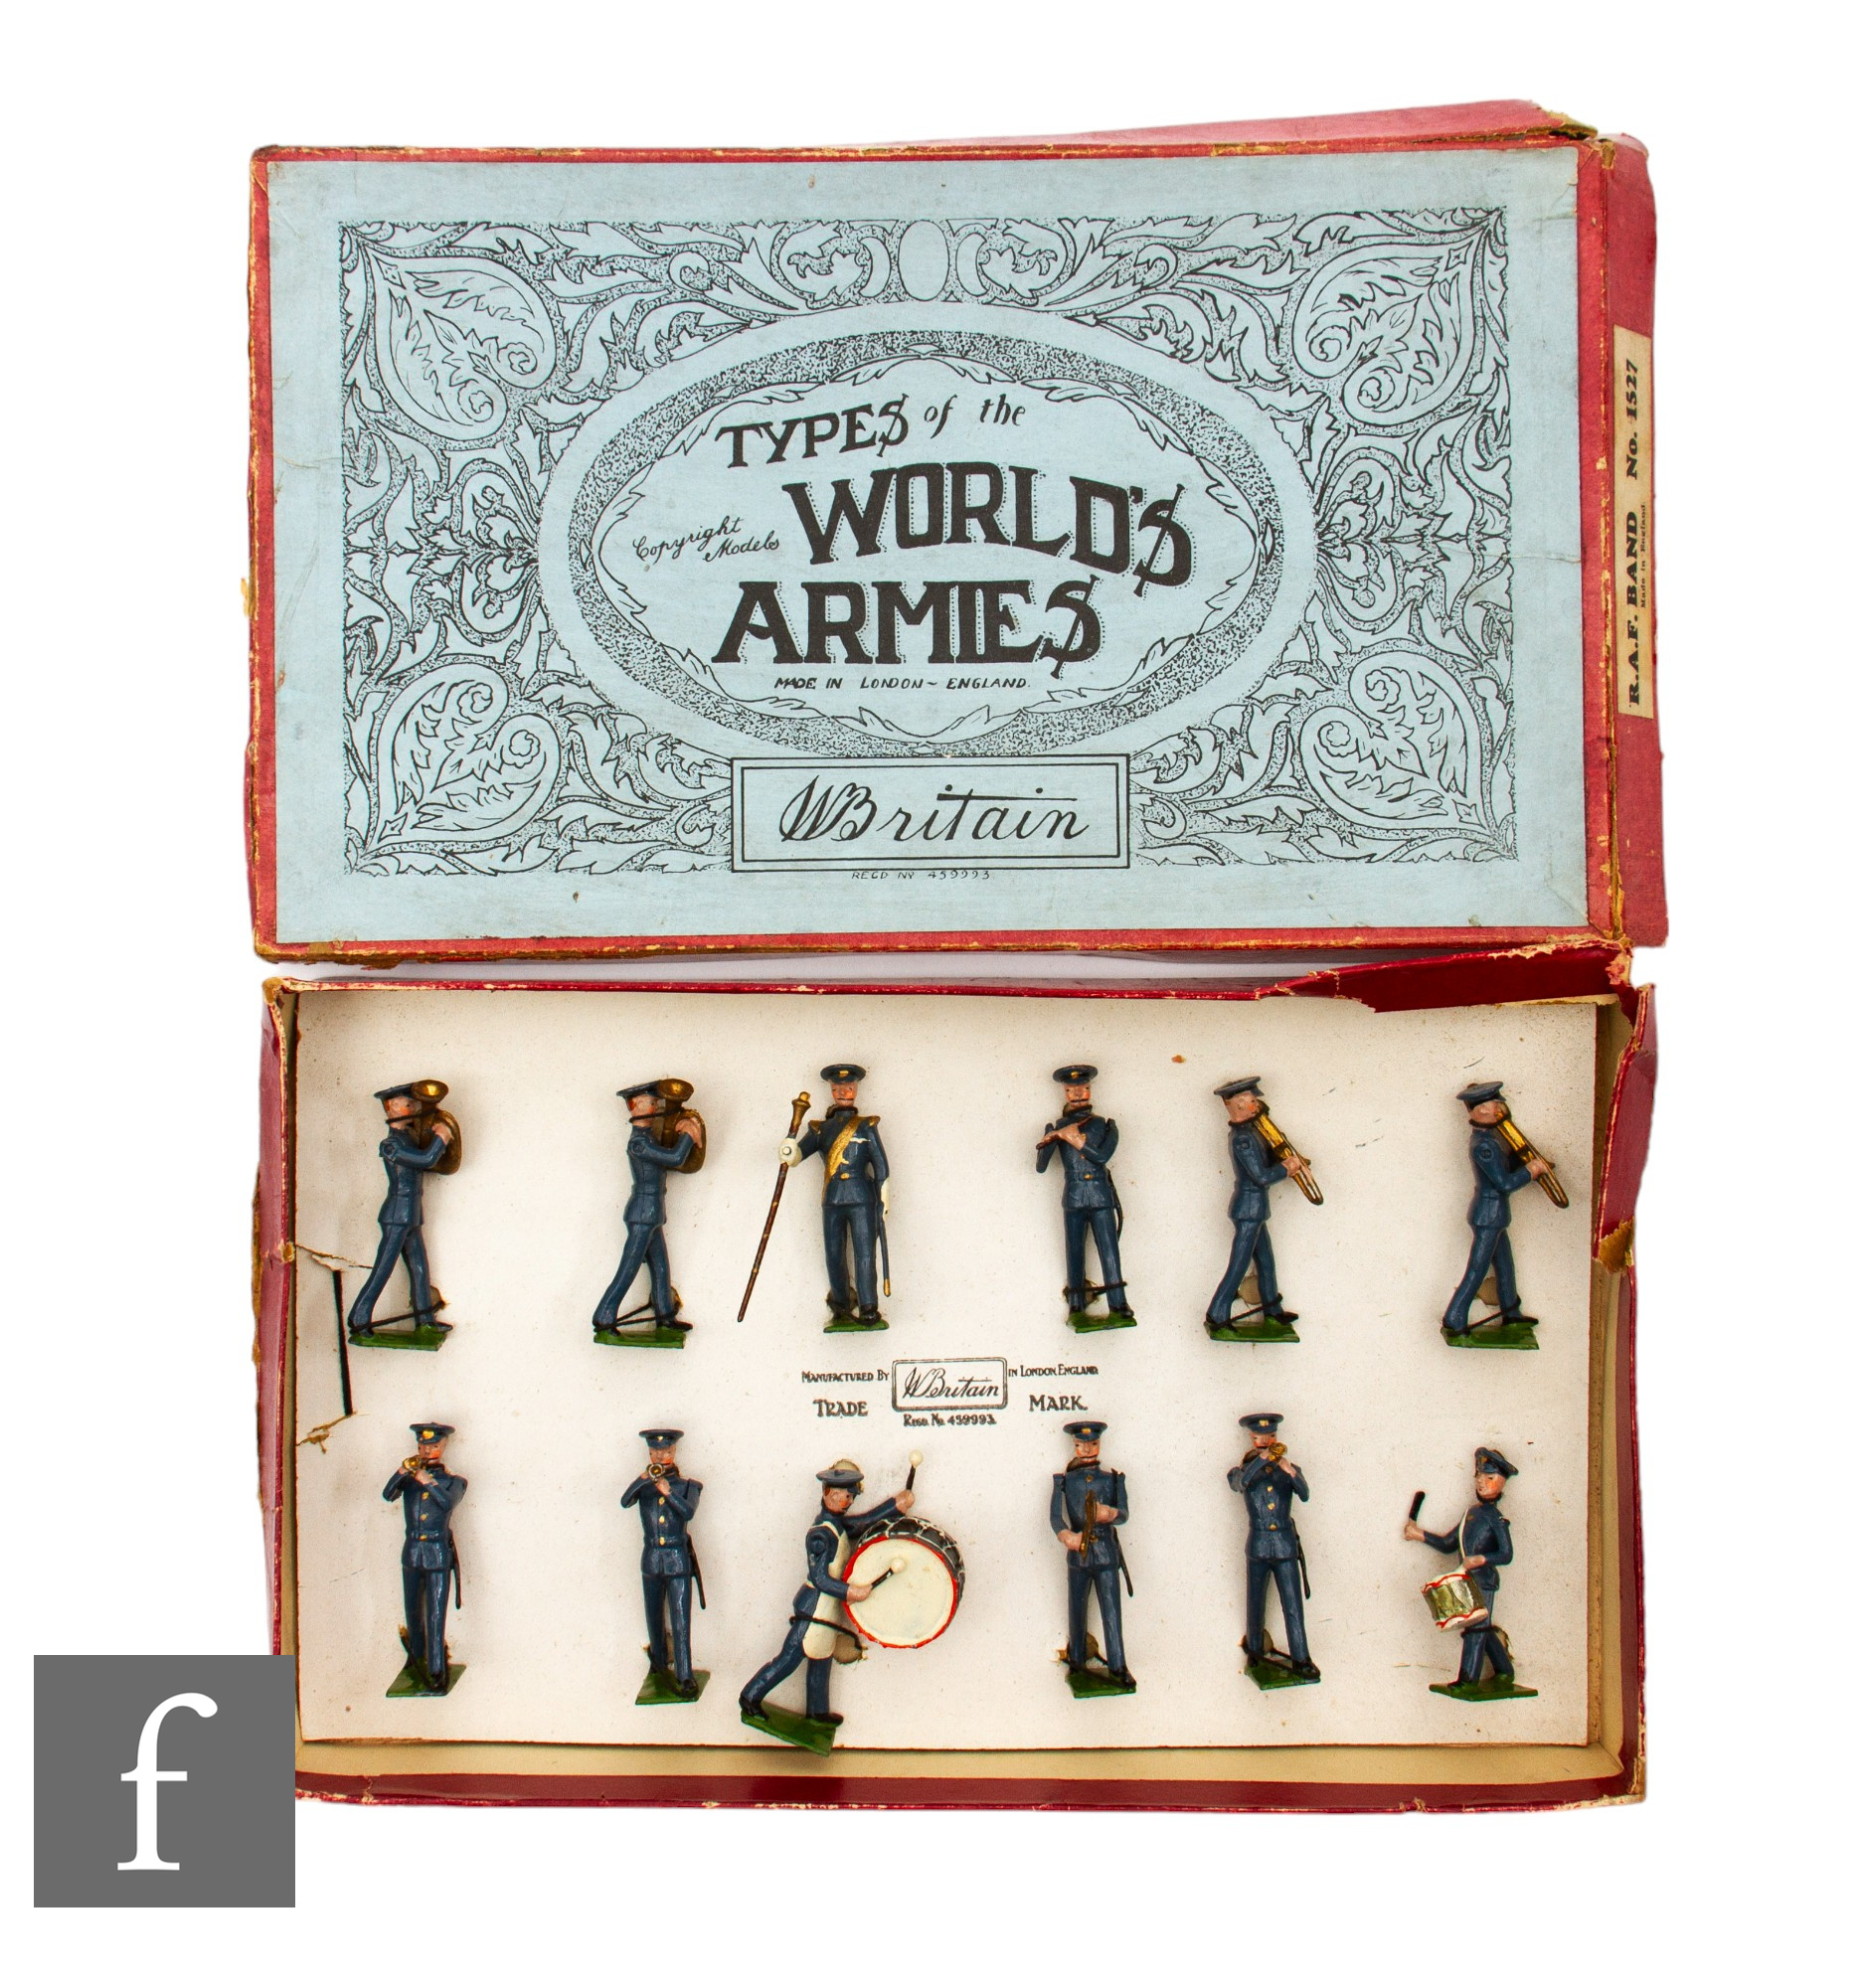 A Britains Types of the World's Armies 1527 RAF Band, pre-war version, comprising Drum Major and